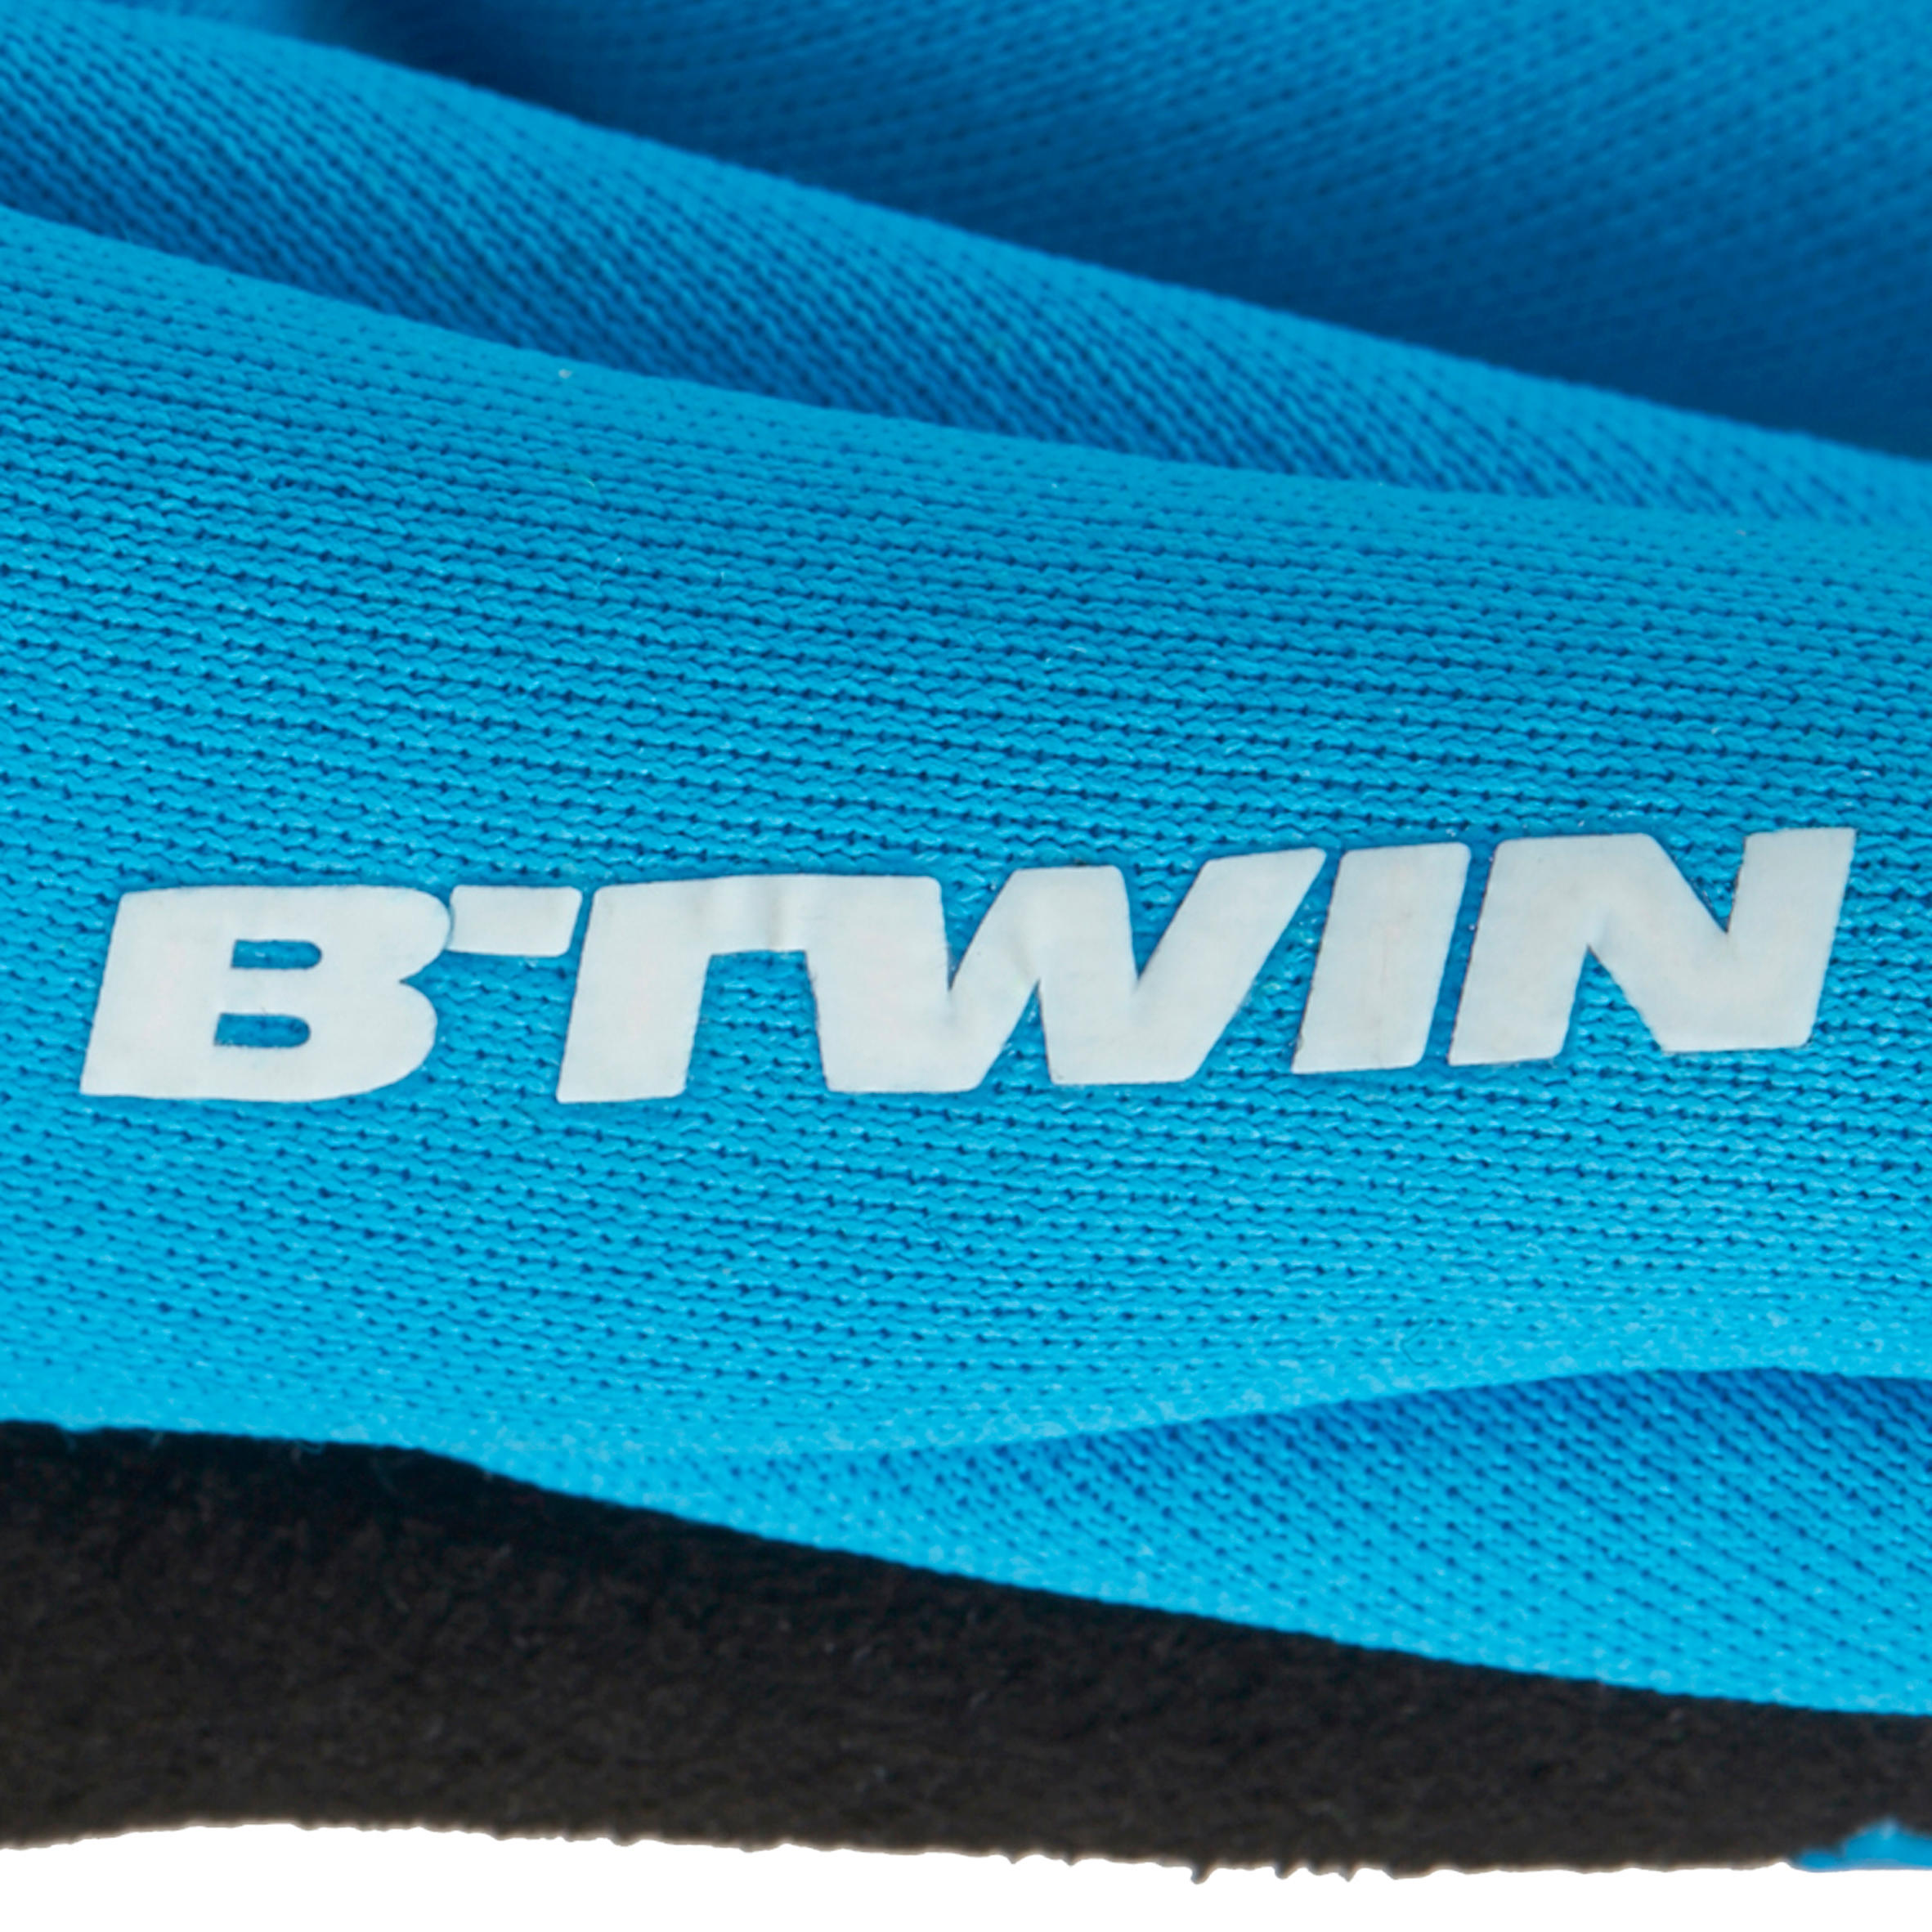 500 Winter Cycling Gloves - Blue 10/10